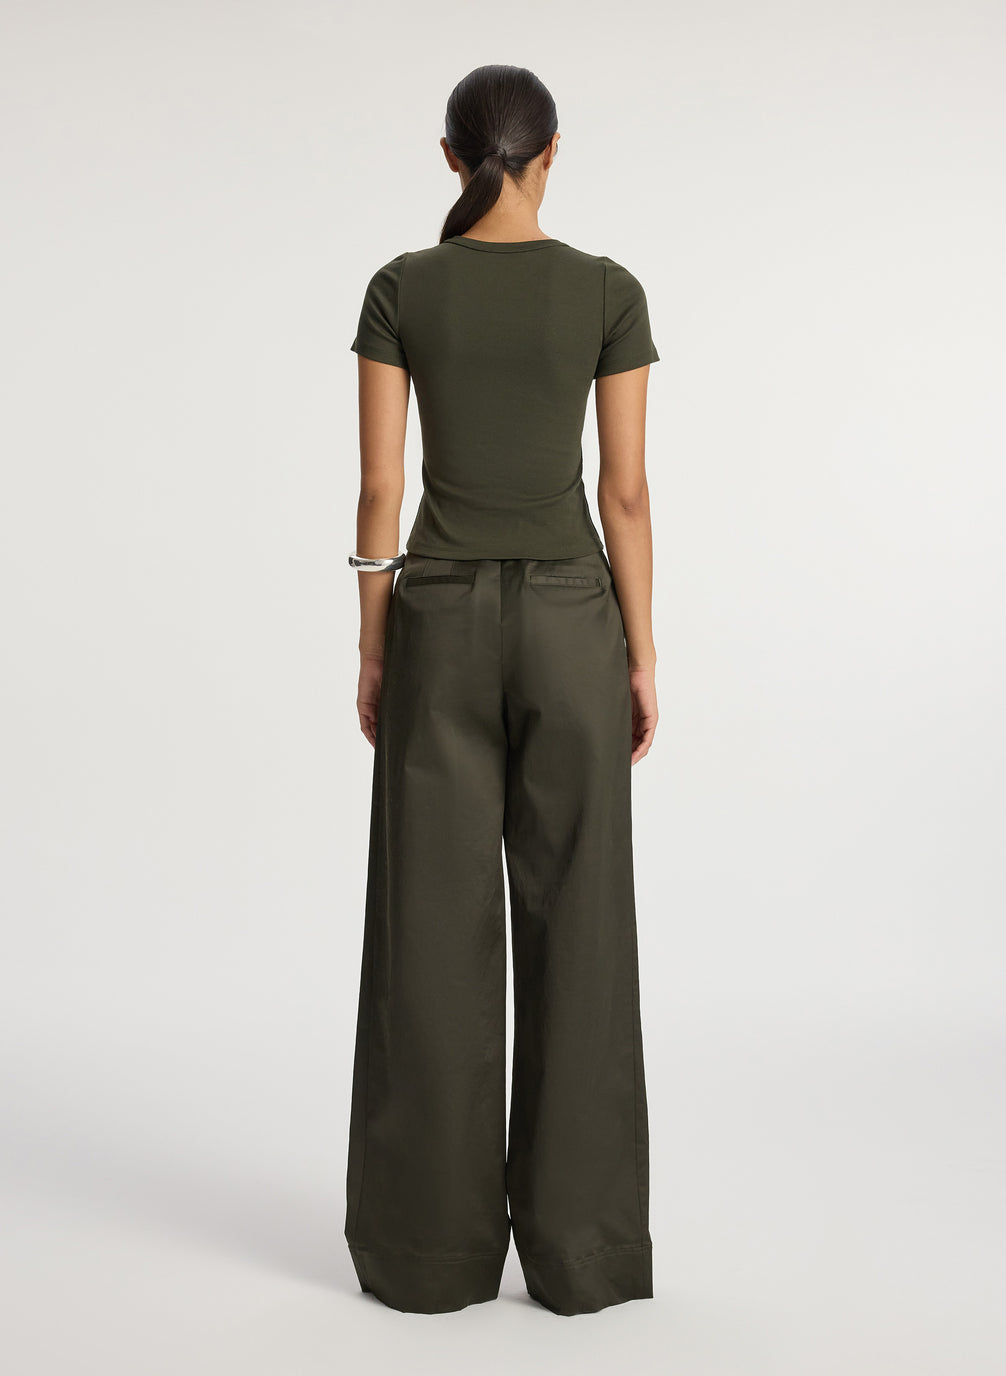 back  view of woman wearing olive green tshirt and olive green wide leg pants